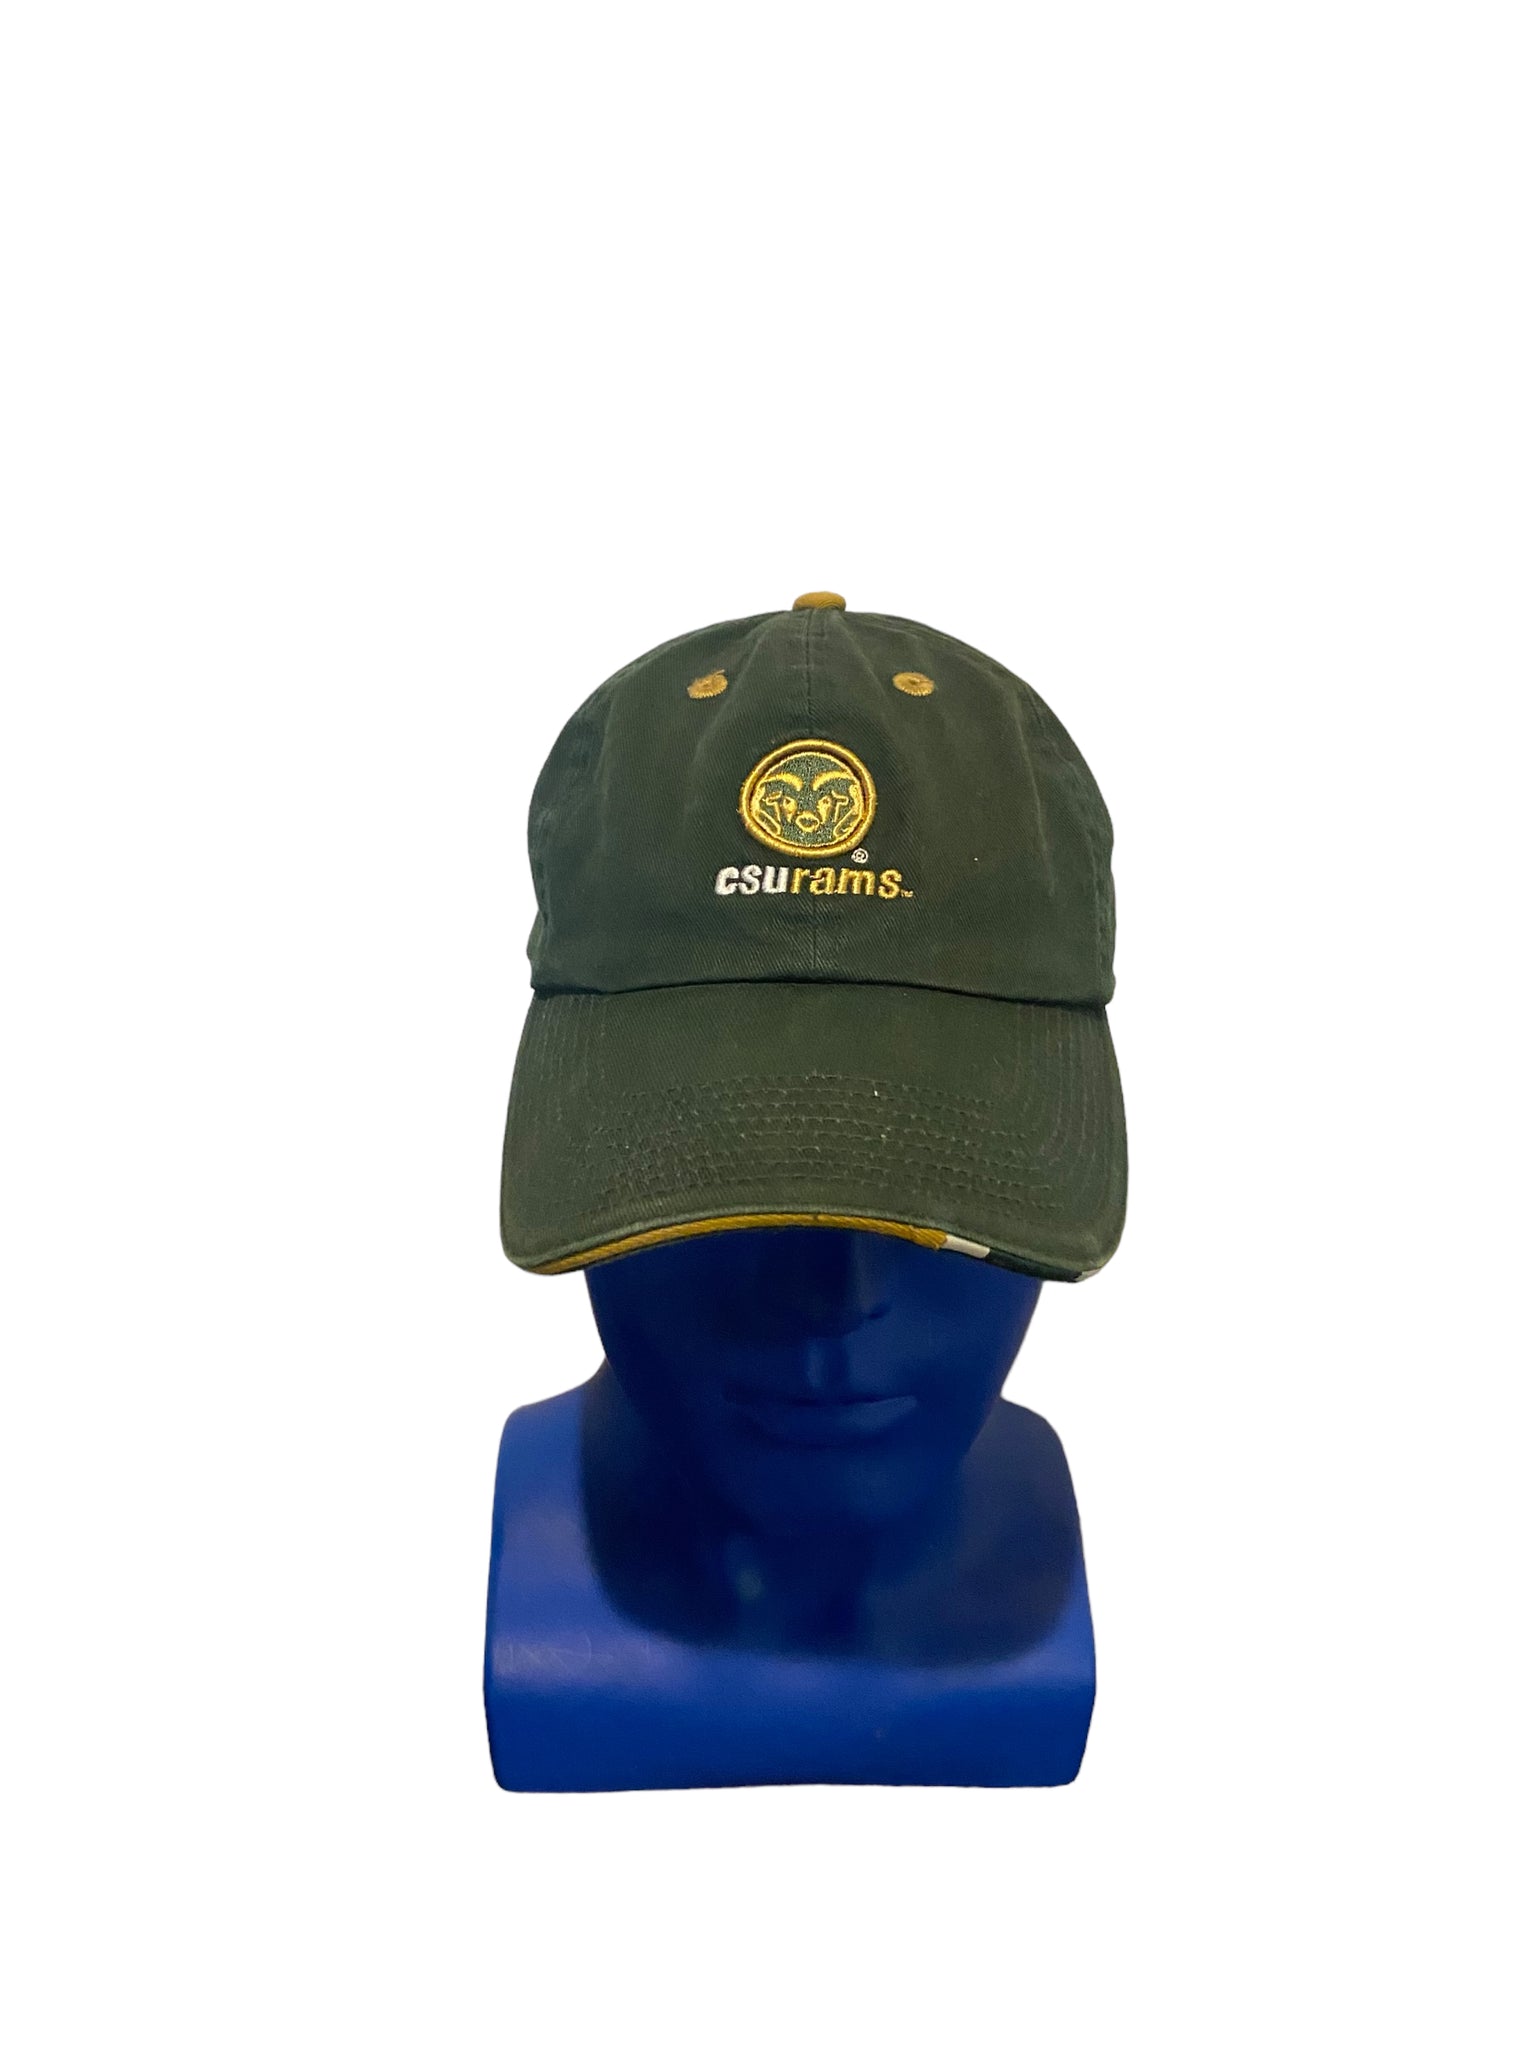 Headwear By the game csu rams embroidered script logo adjustable strap dad hat